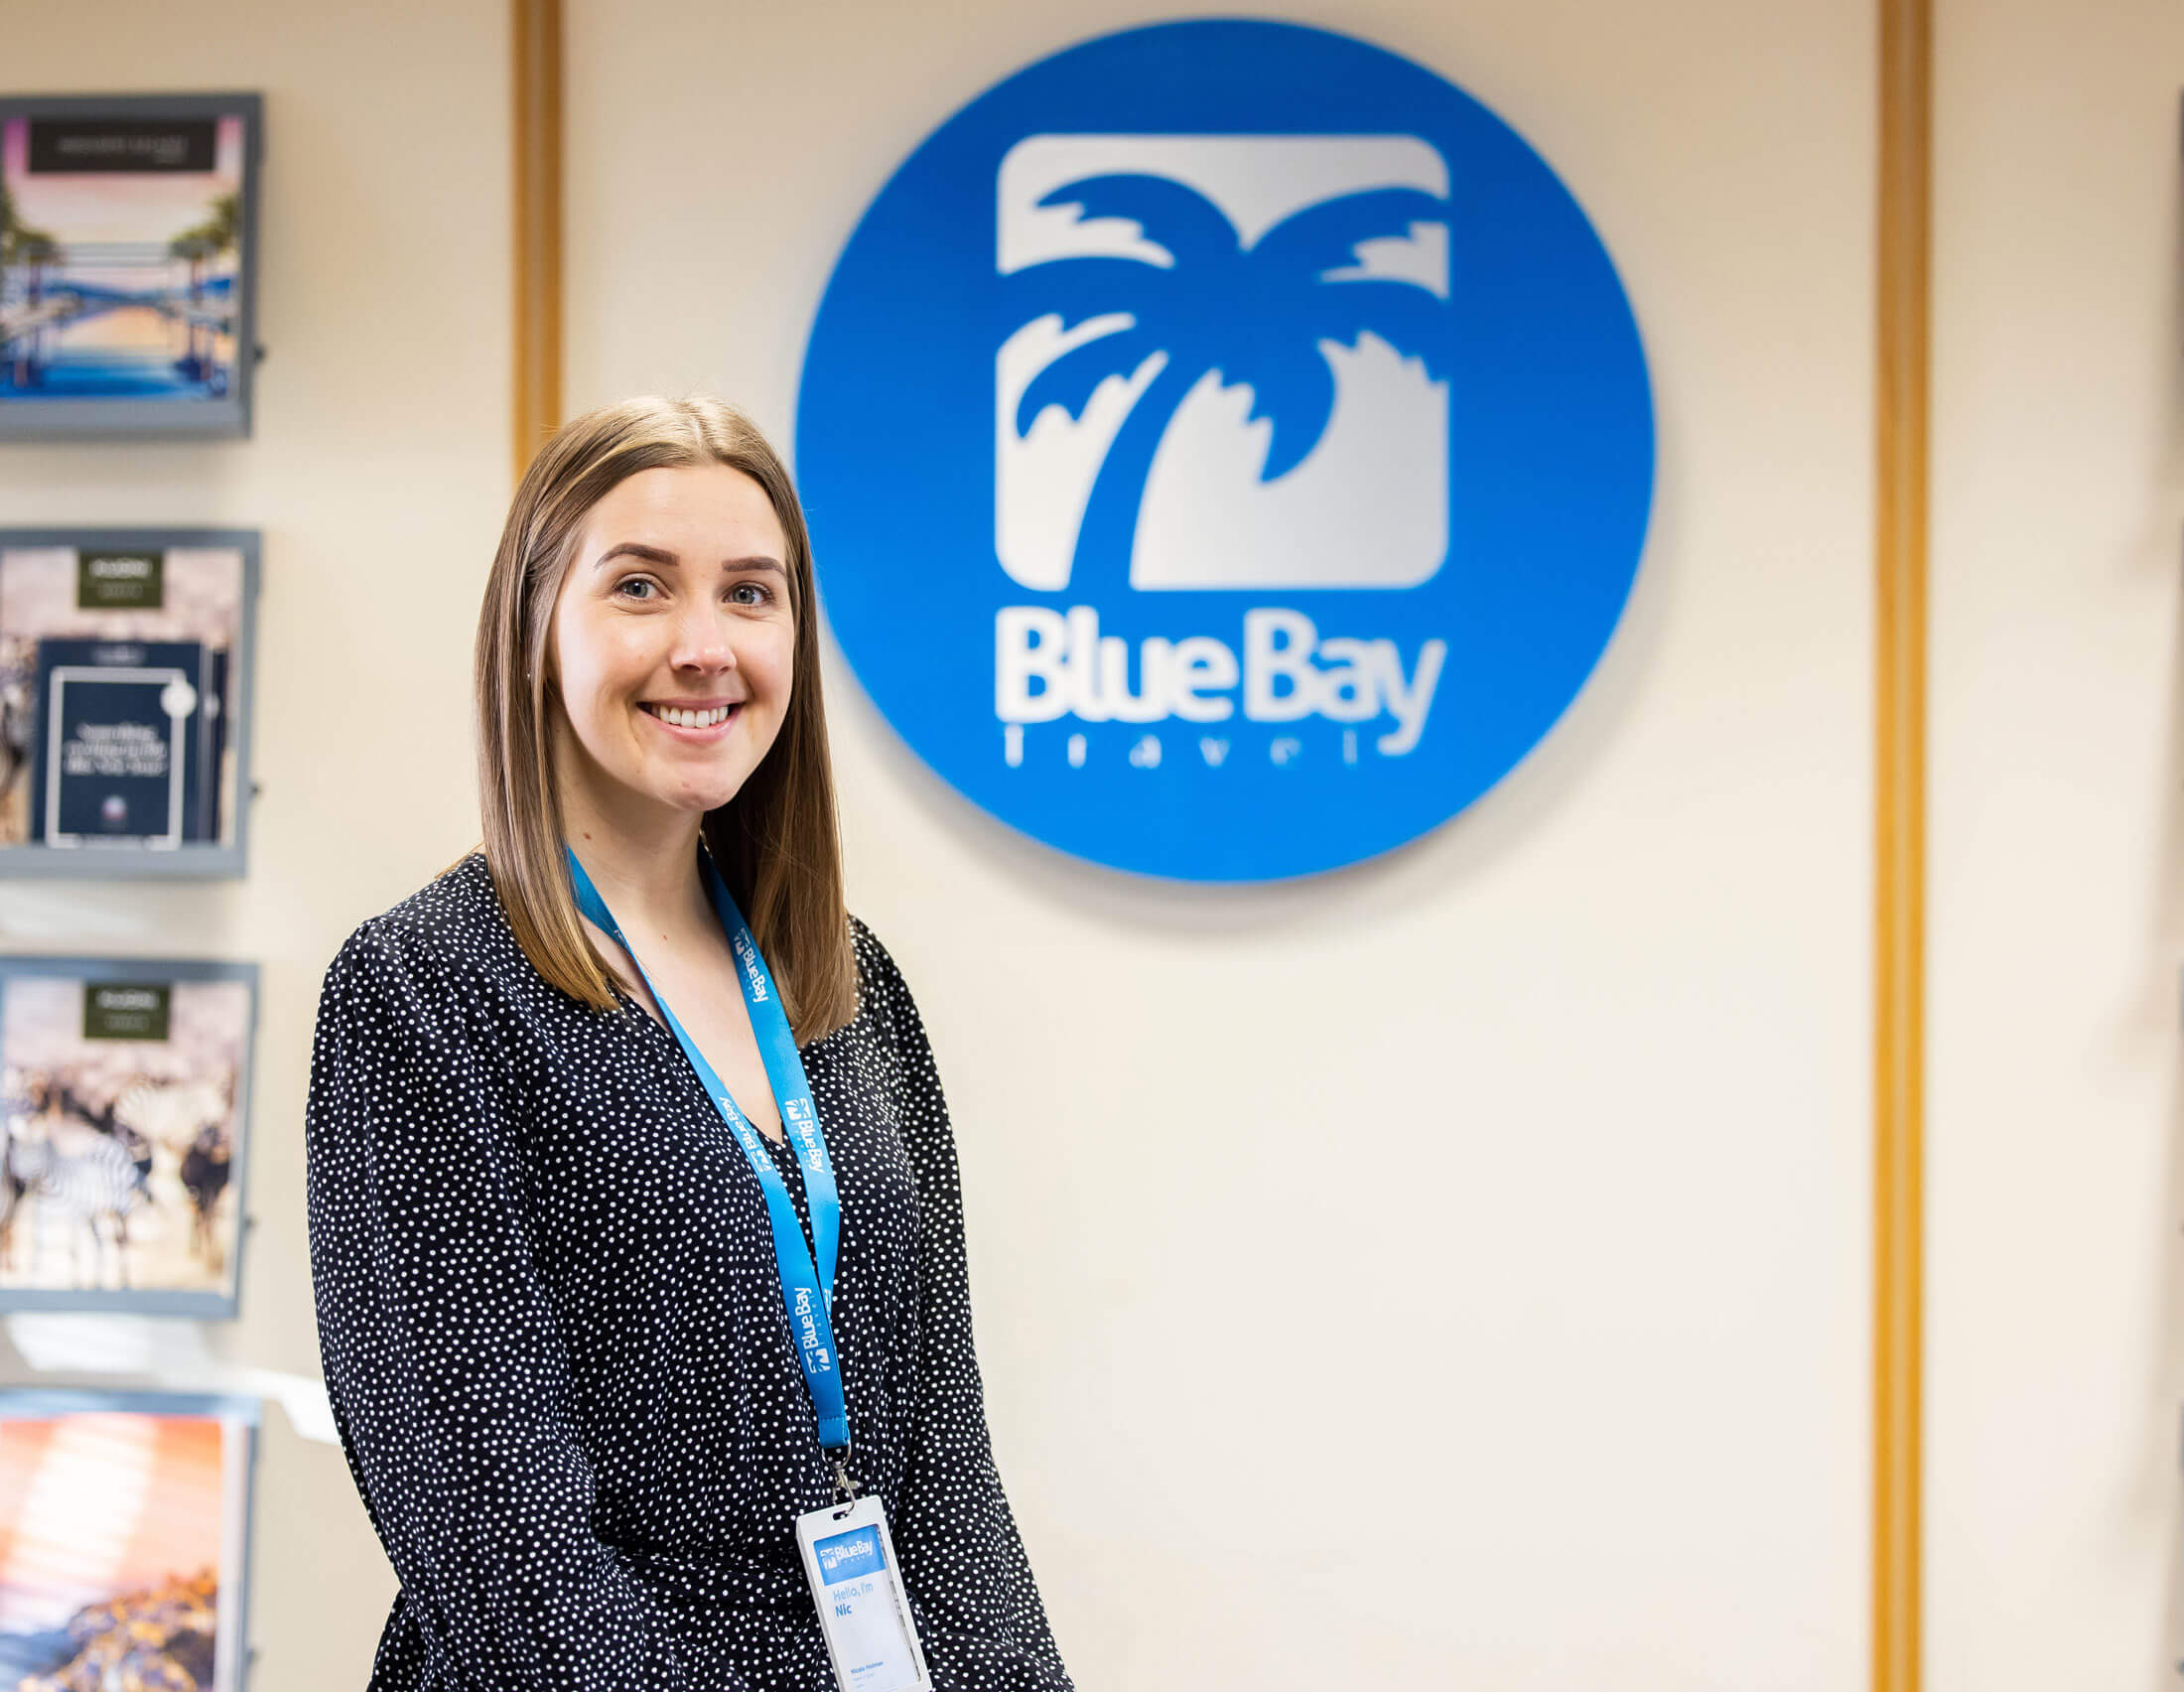 The Head of Sales in front of the Blue Bay Travel logo